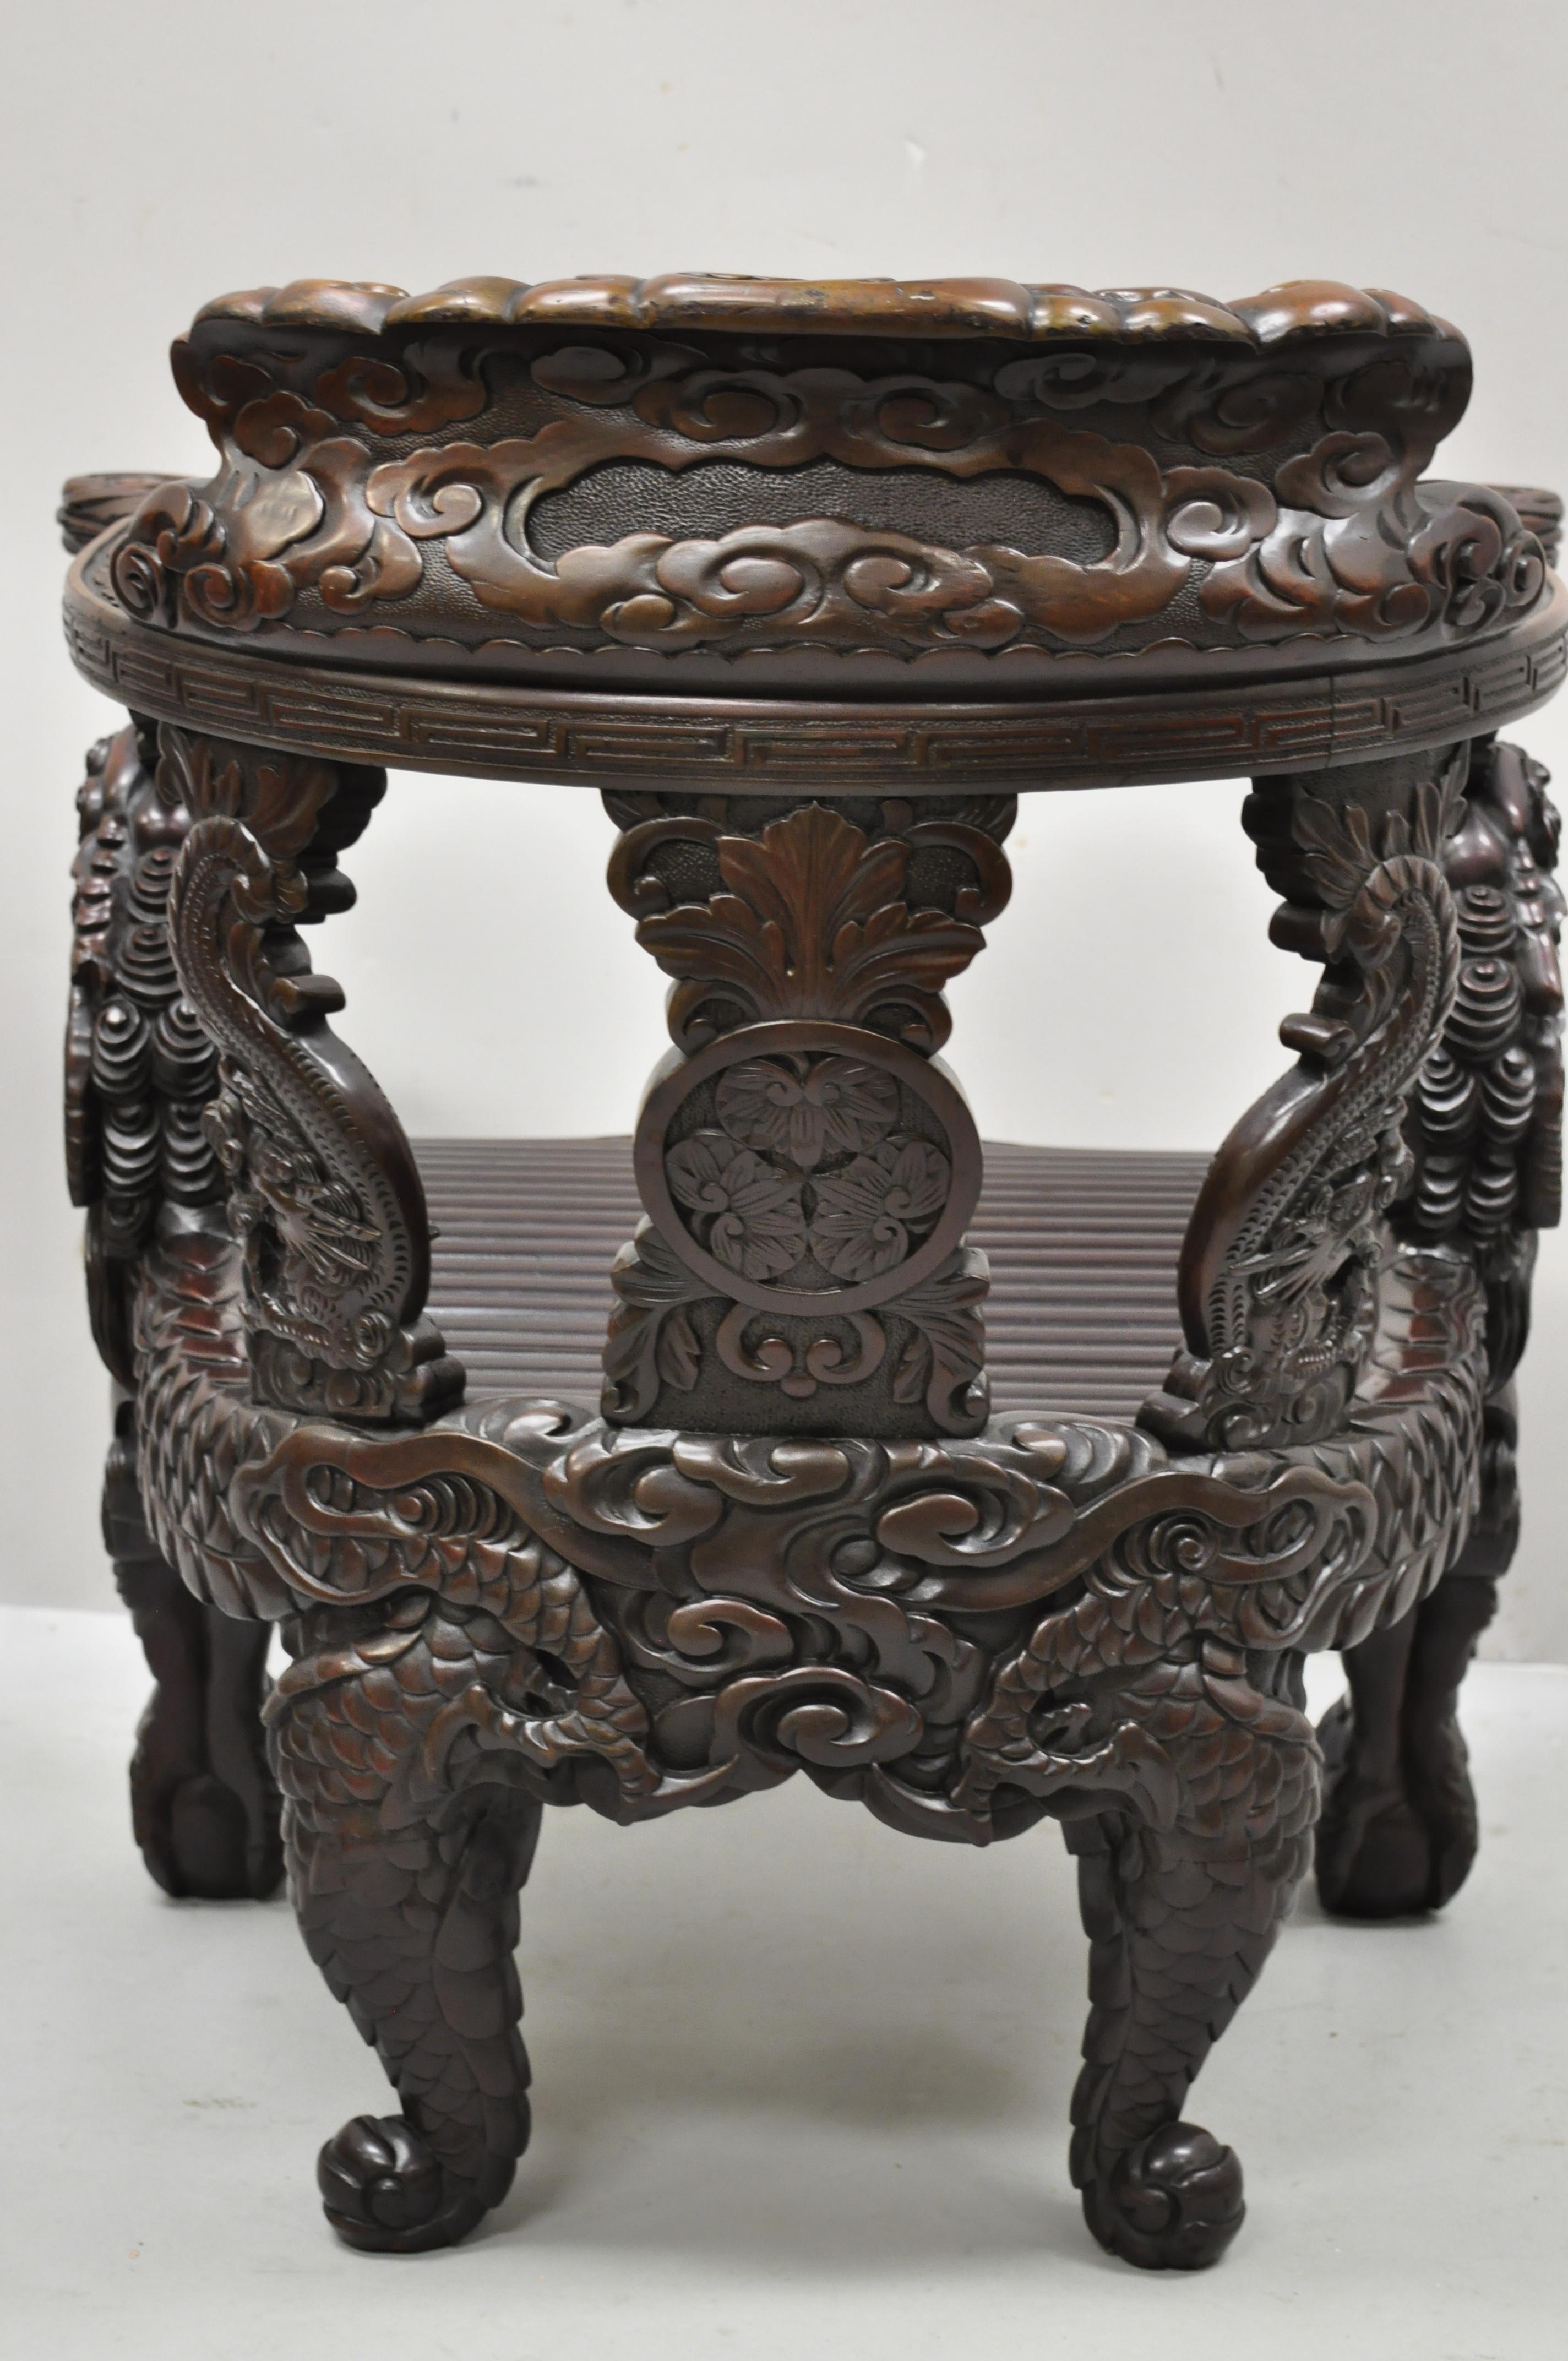 Antique Japanese Meiji Period Dragon Carved Hardwood Lounge Throne Arm Chair 1